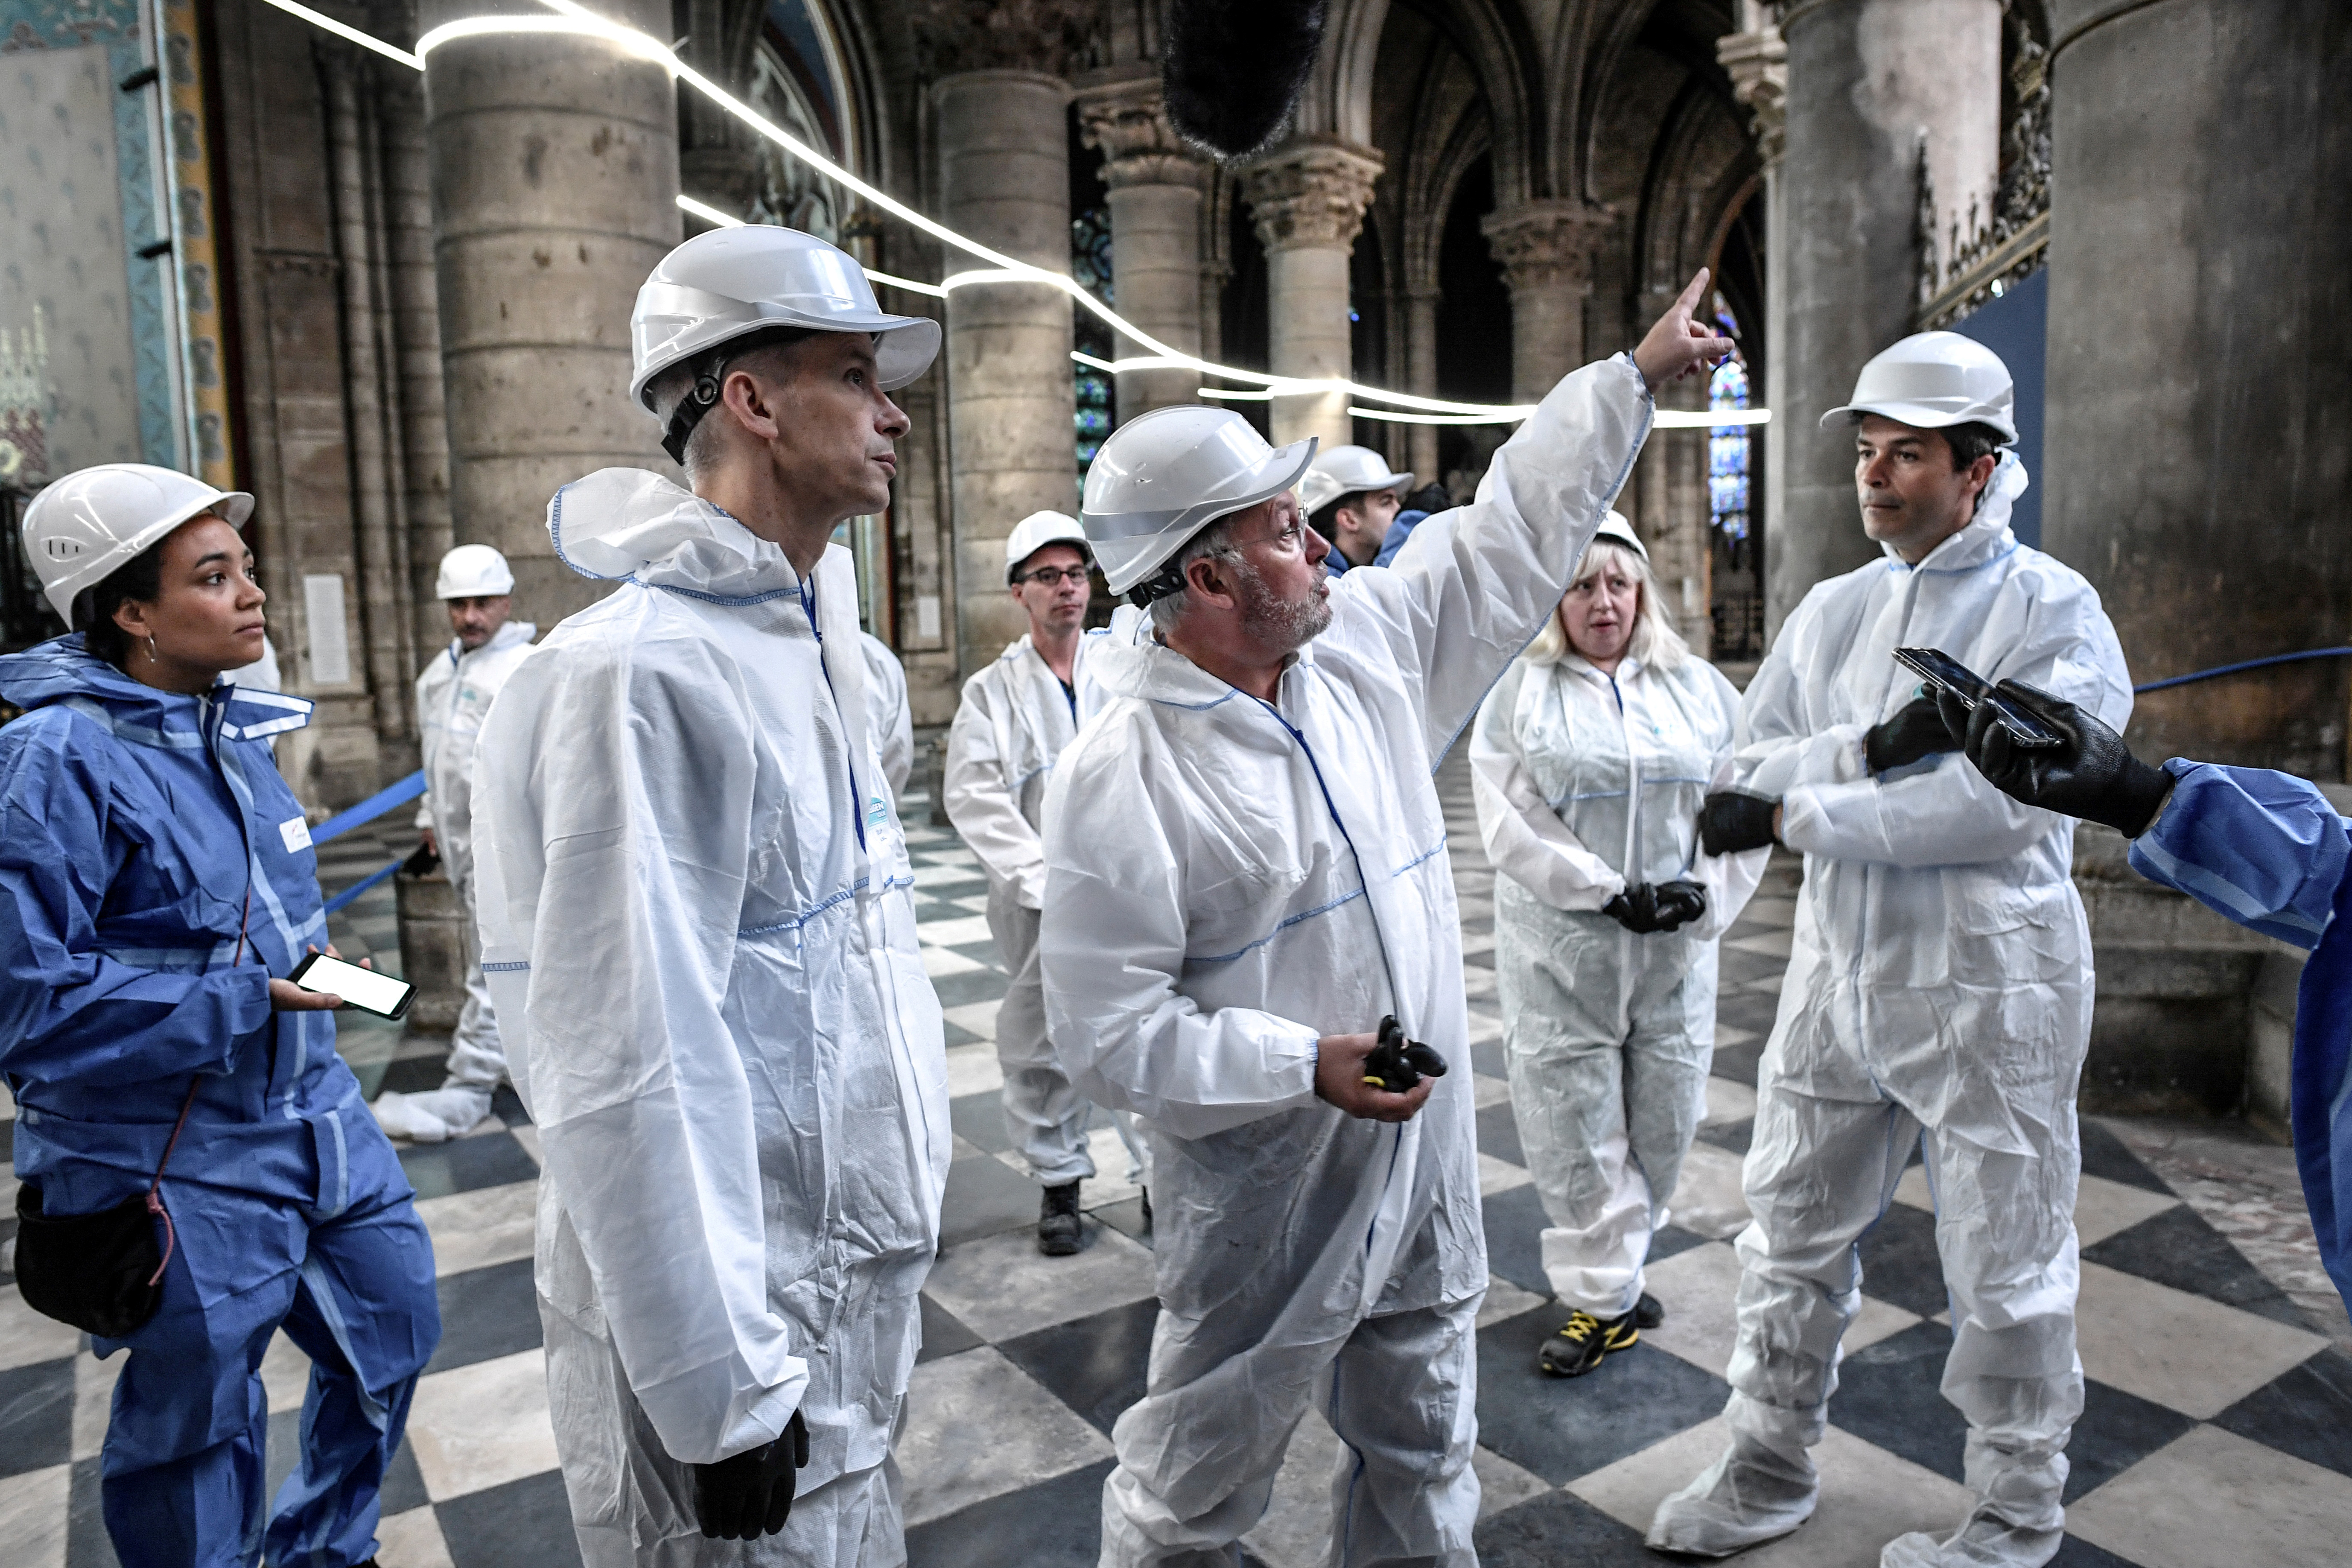 Philippe Villeneuve (pointing) speaks with the French Minister of Culture Franck Riester as they observe the damaged Notre Damme Cathedral. (REUTERS/POOL)